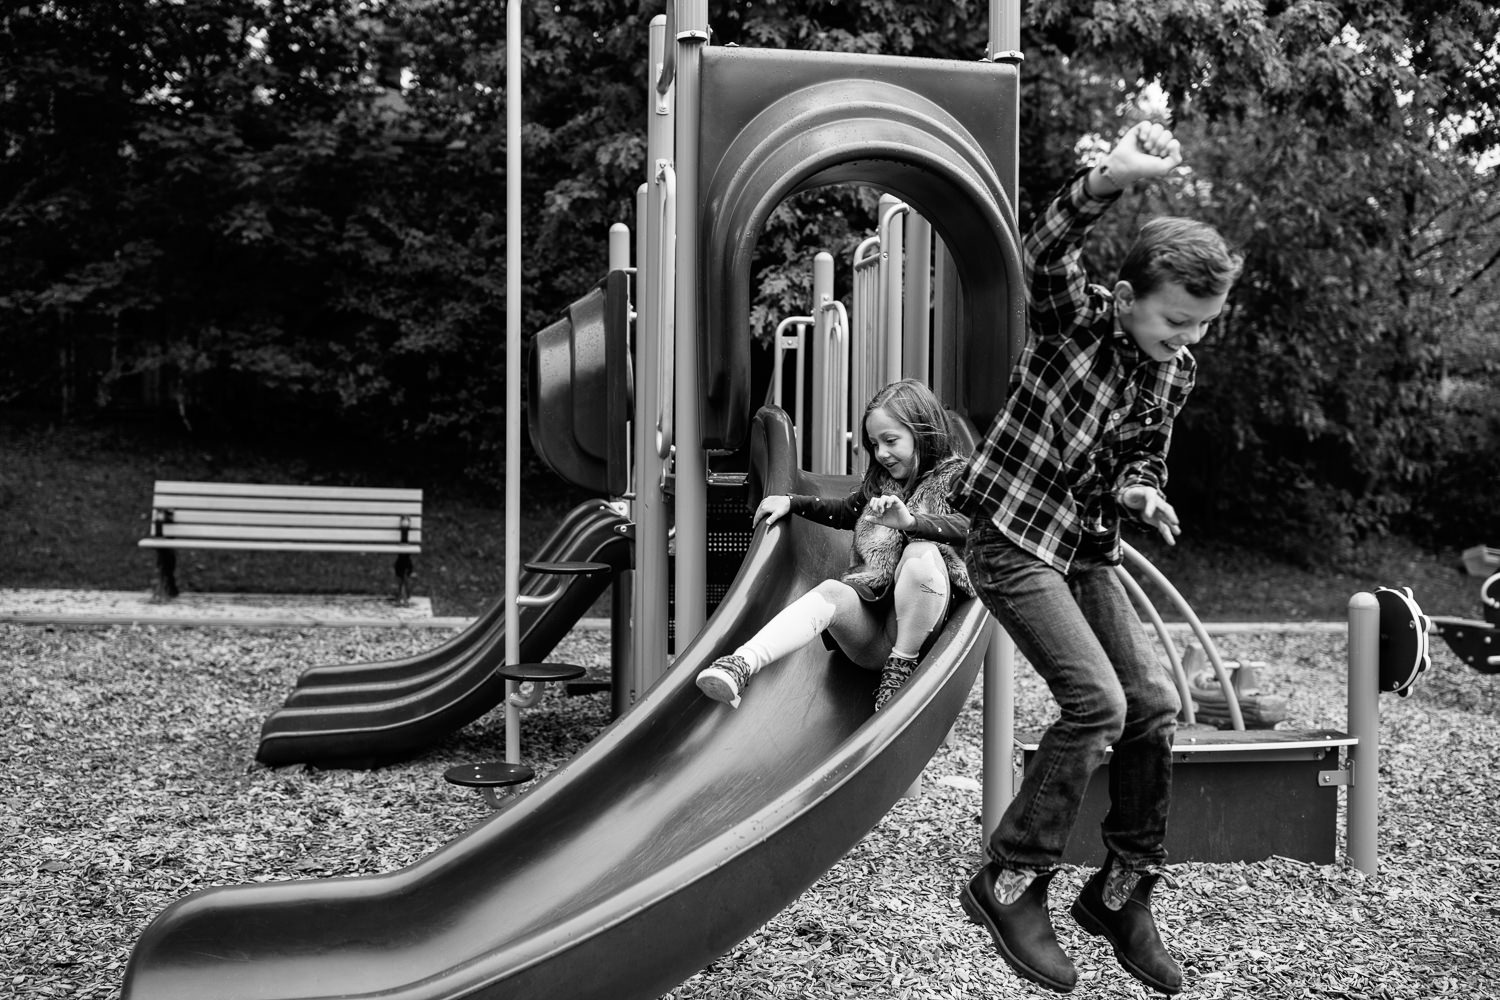 9 year old boy jumping off slide at city park, 7 year old girl sliding down in background - GTA Lifestyle Photos